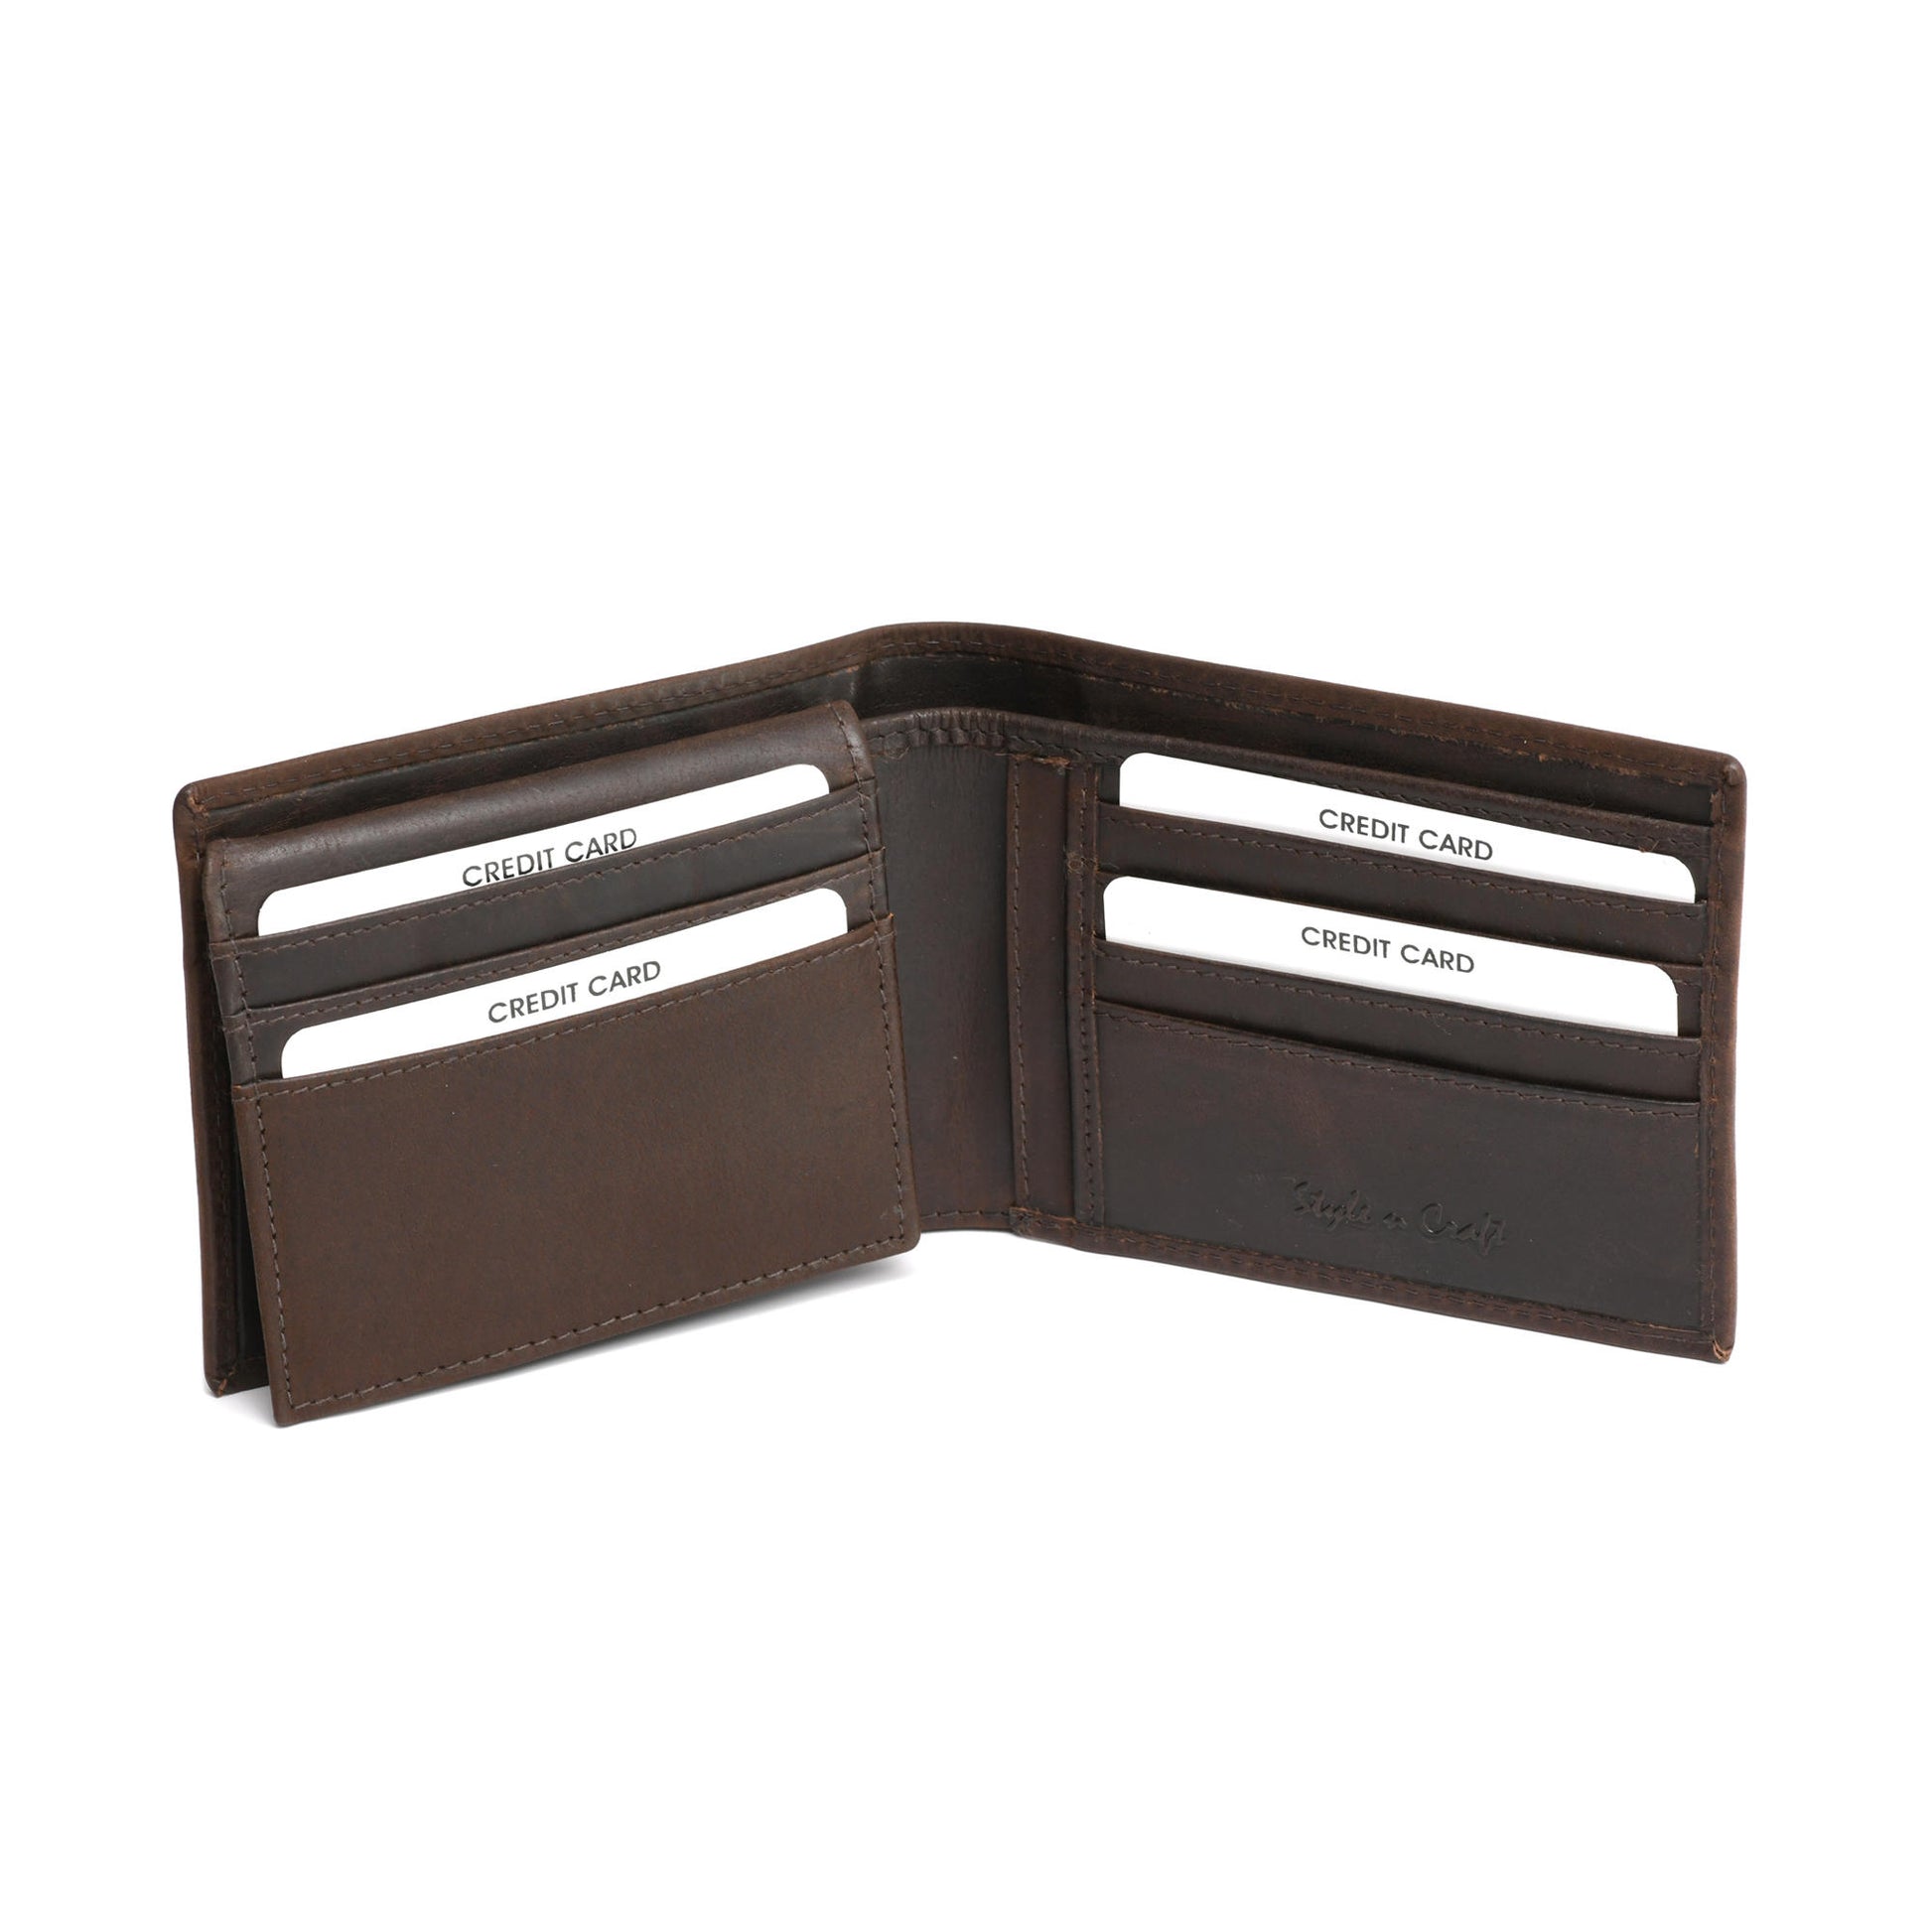 Style n Craft 391004 Bi-Fold PassCase Wallet with Flap in Dark Brown Top Grain Leather - Open View